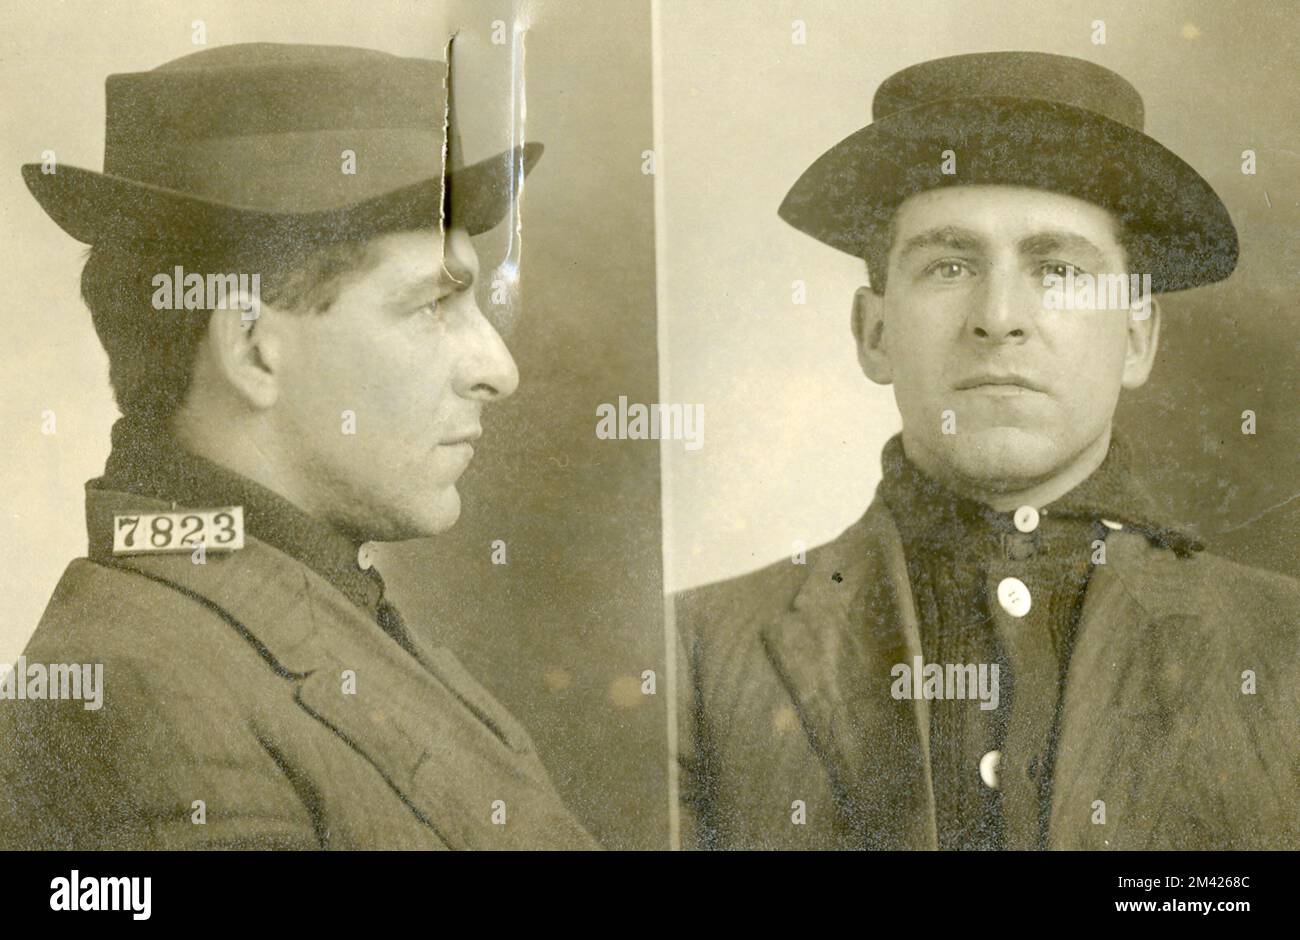 Photograph of Albert Ouellette. This item is the prison photograph, also known as the 'mug shot,' of Leavenworth inmate Albert Oullette, register number 7823. Bureau of Prisons, Inmate case files. Stock Photo